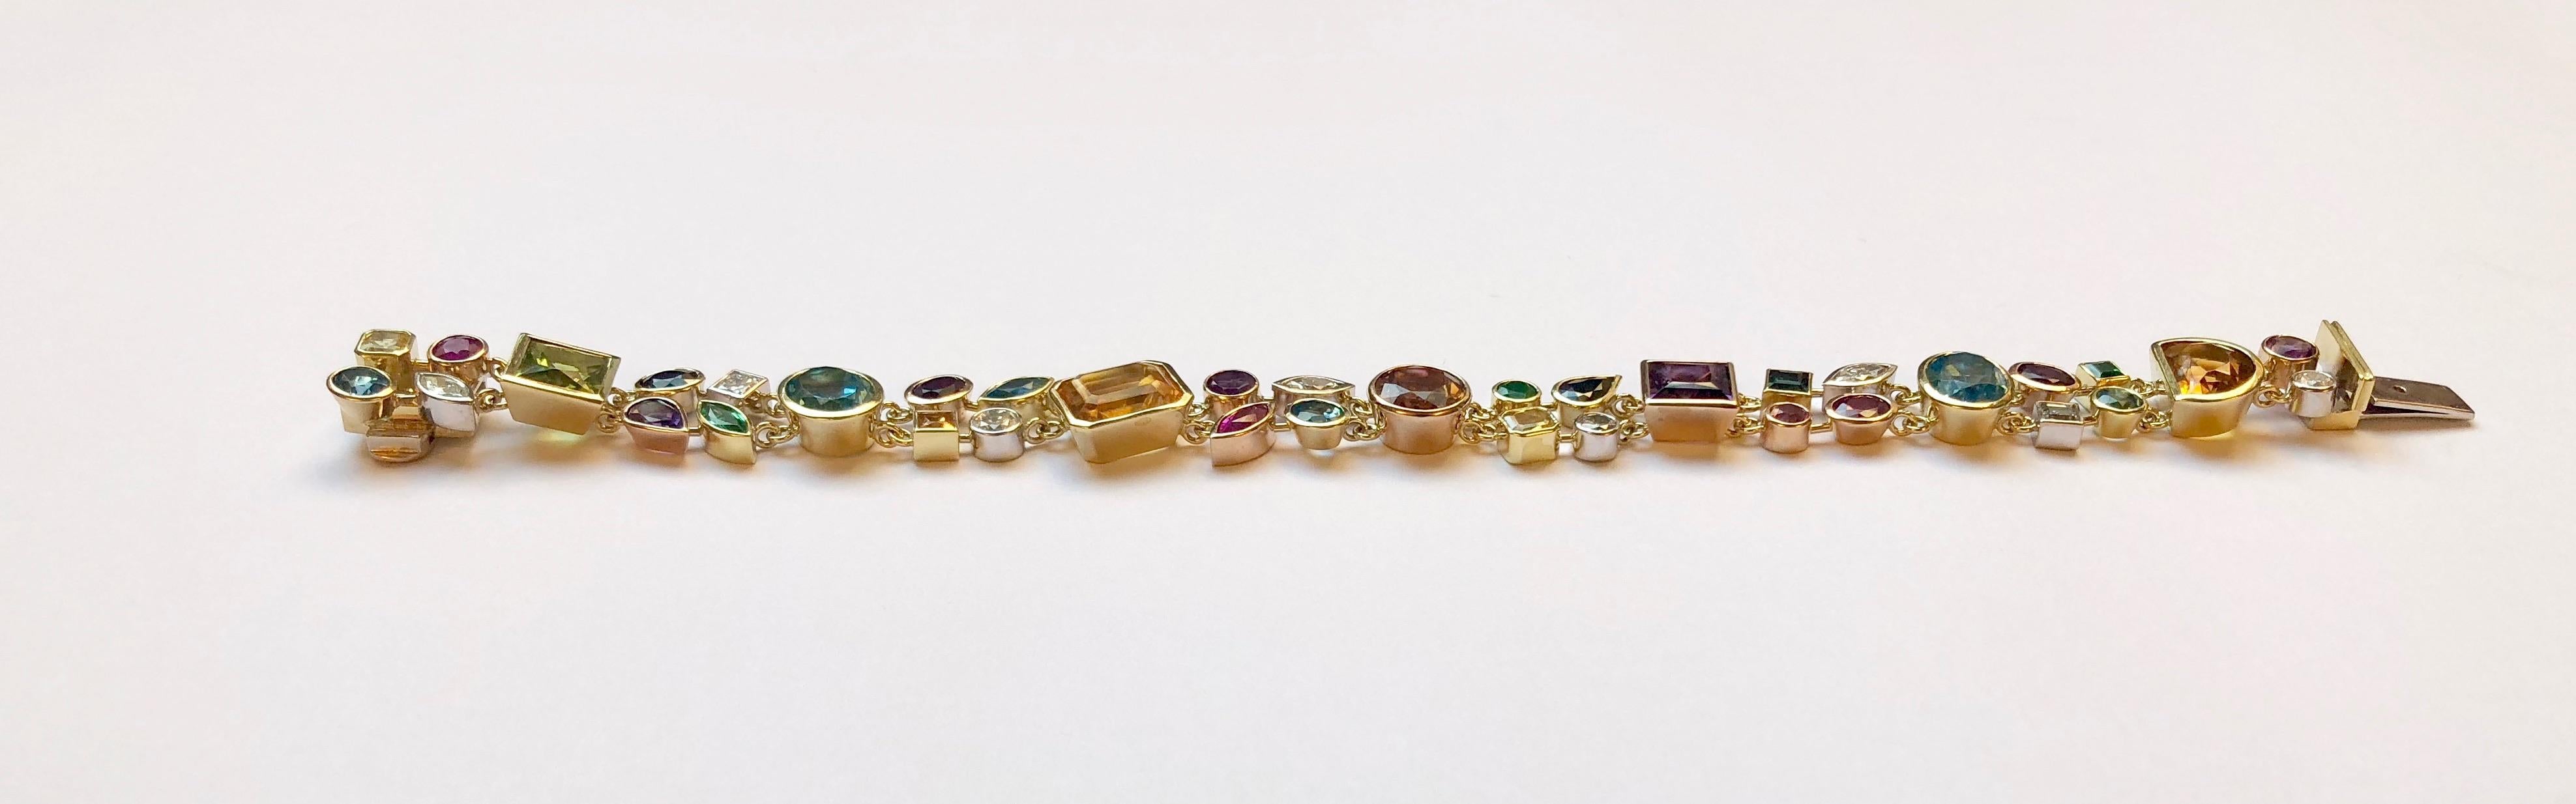 This stunning bracelet features several gemstones, such as topaz, emerald, diamond and amethyst. Each stone is set in white, yellow or rose 18kt gold, depending on the color as to best accentuate it.

This pendant was designed and made by Van der